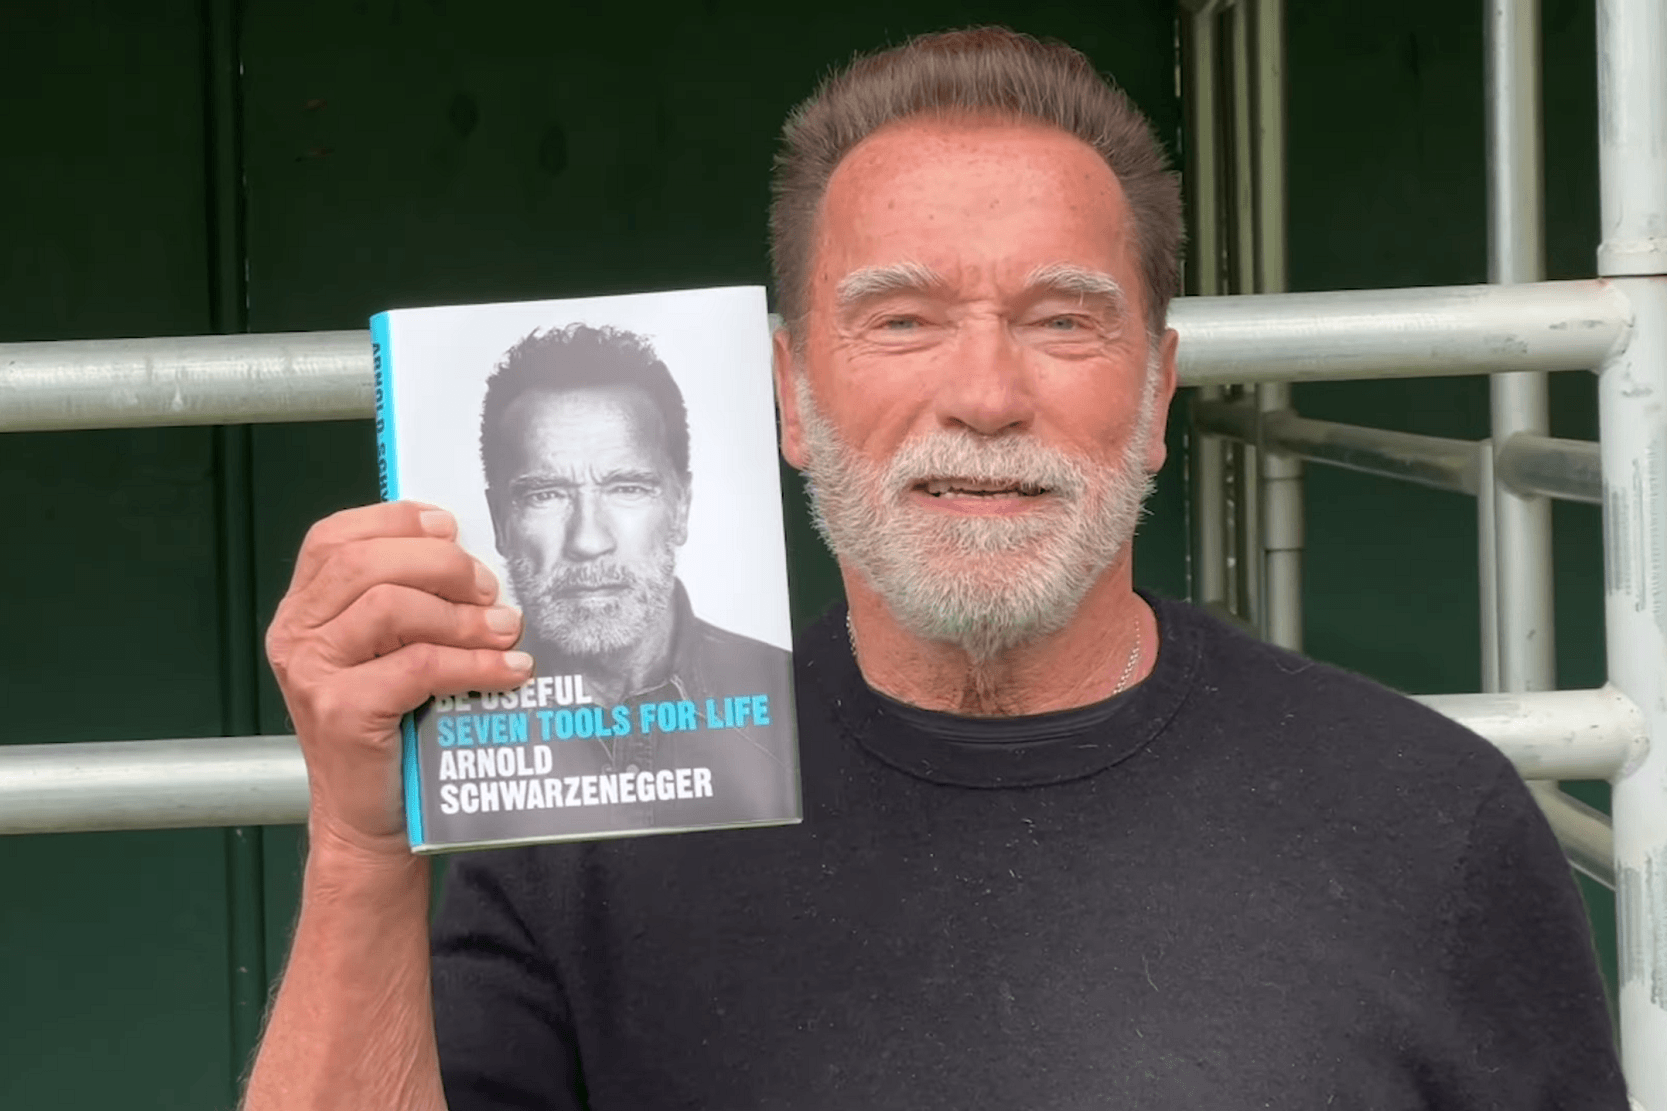 Schwarzenegger's Book "Be Useful" is Reselling for 150 Resell Calendar